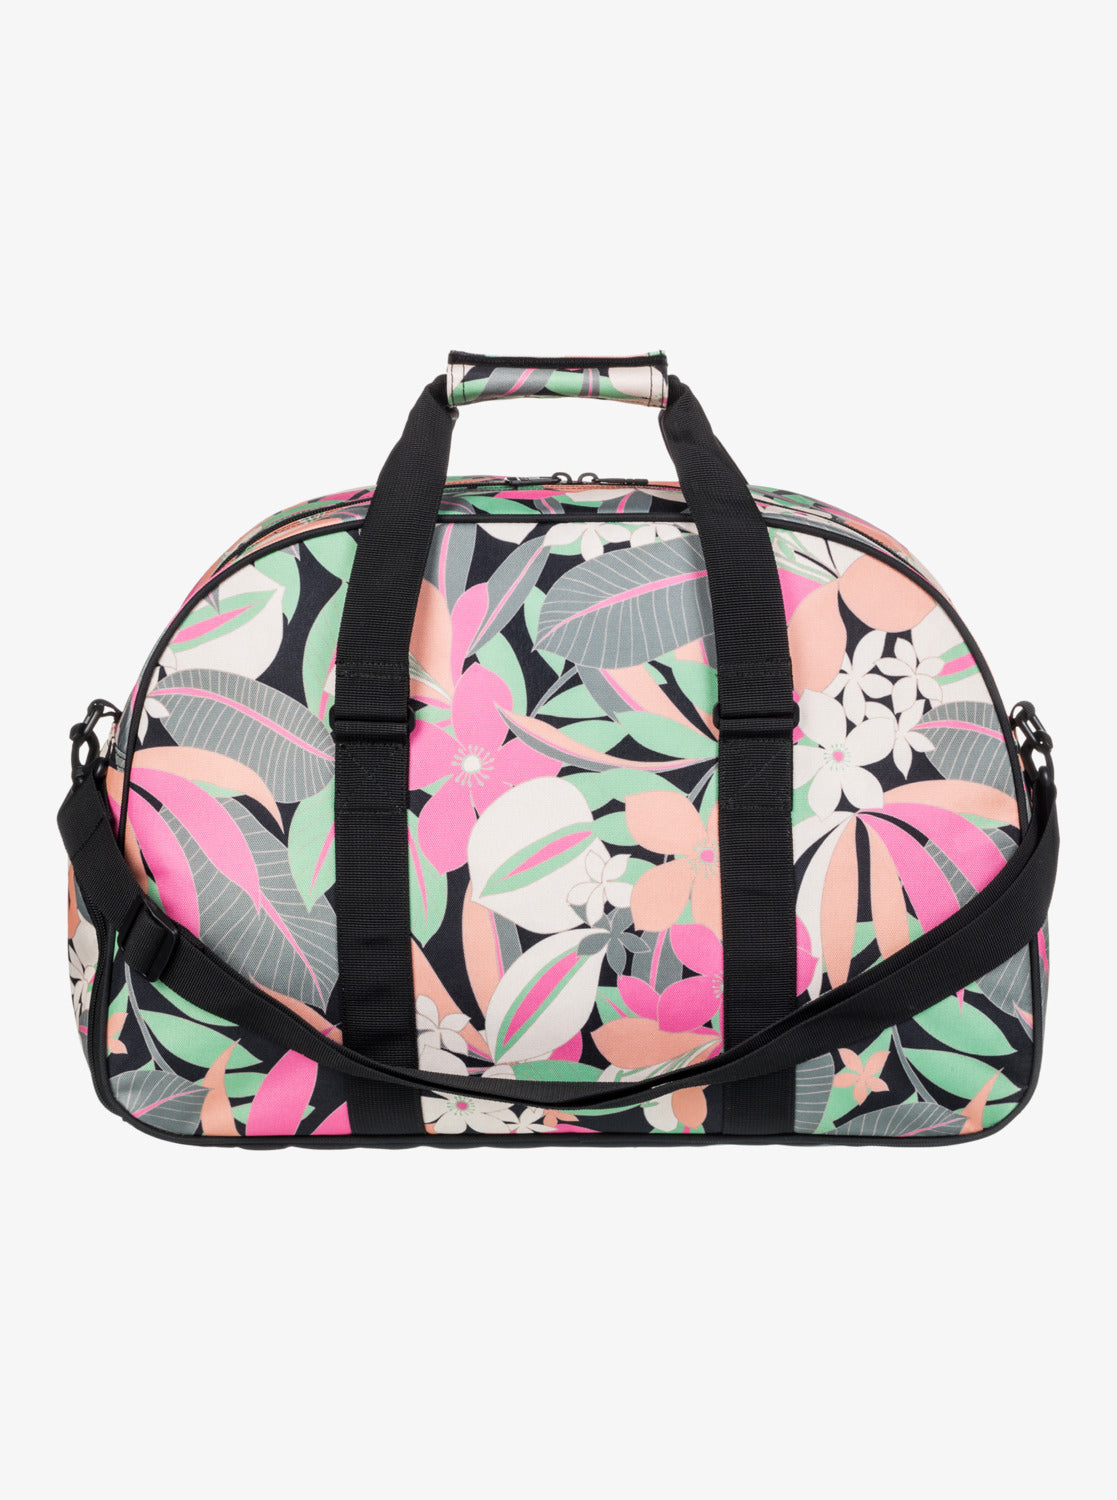 Roxy Feel Happy Medium Duffle Bag in Anthracite Palm Song